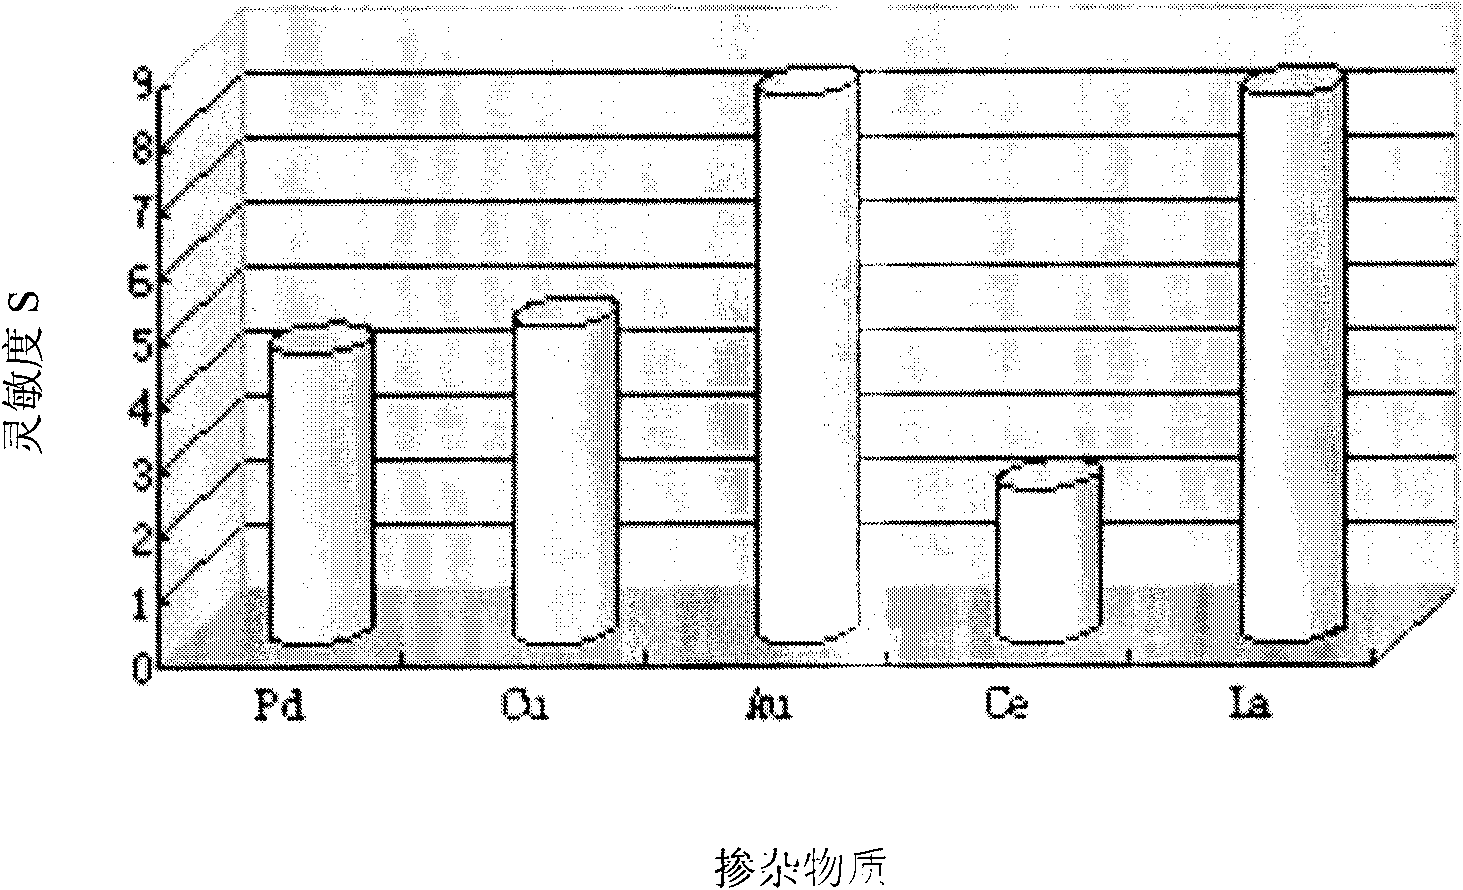 Noble metal doped SnO2 composite material and preparation method thereof